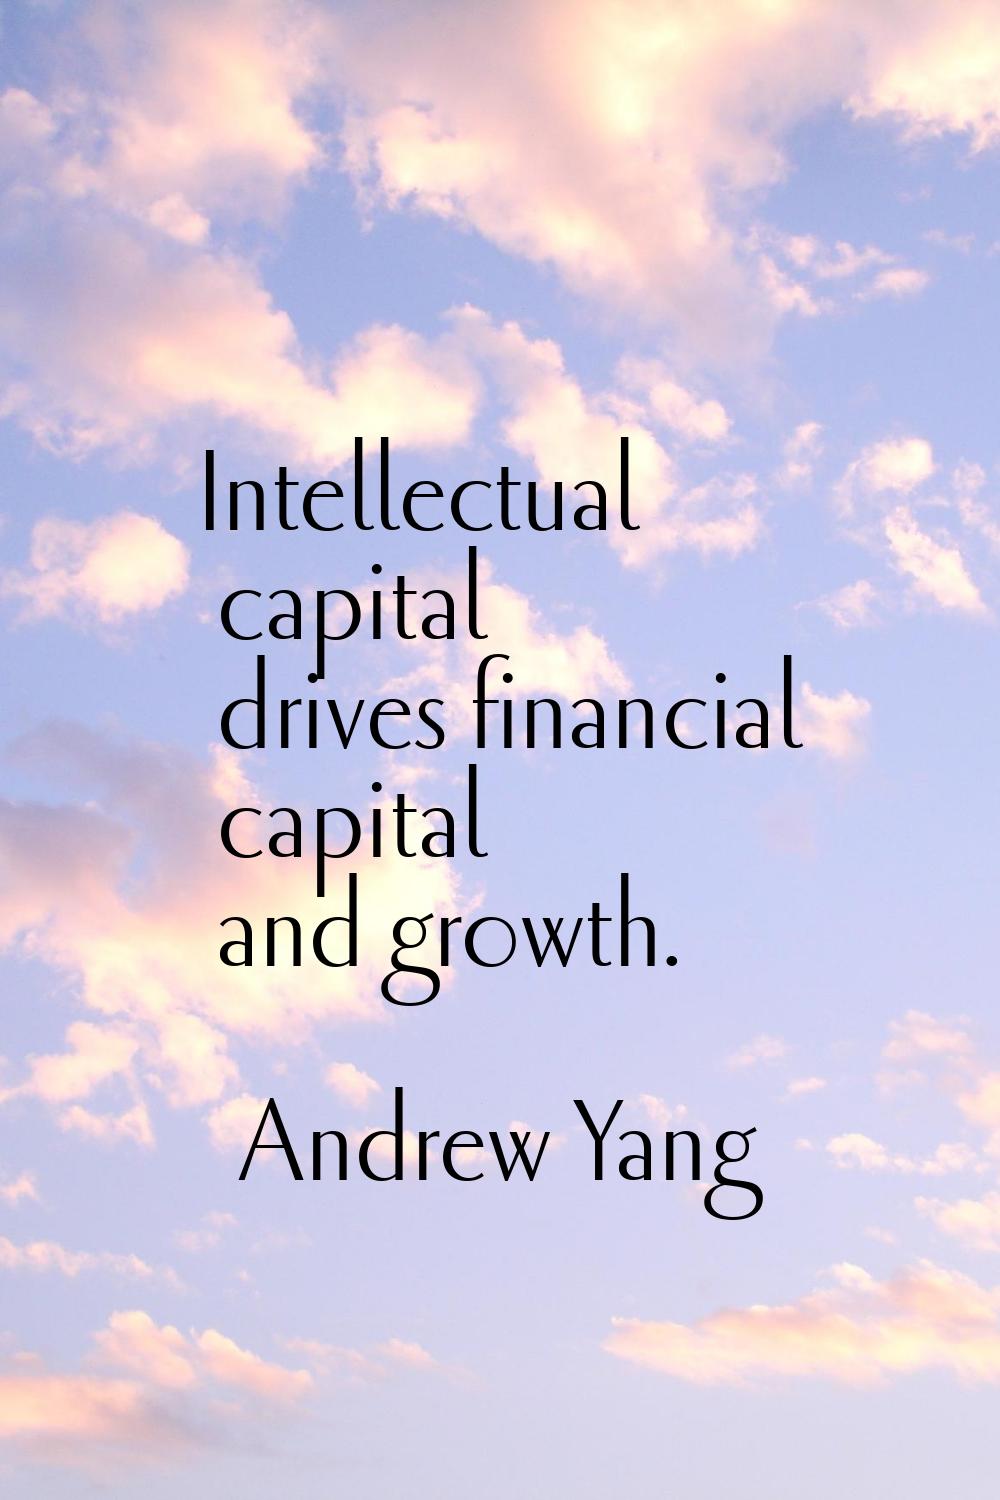 Intellectual capital drives financial capital and growth.